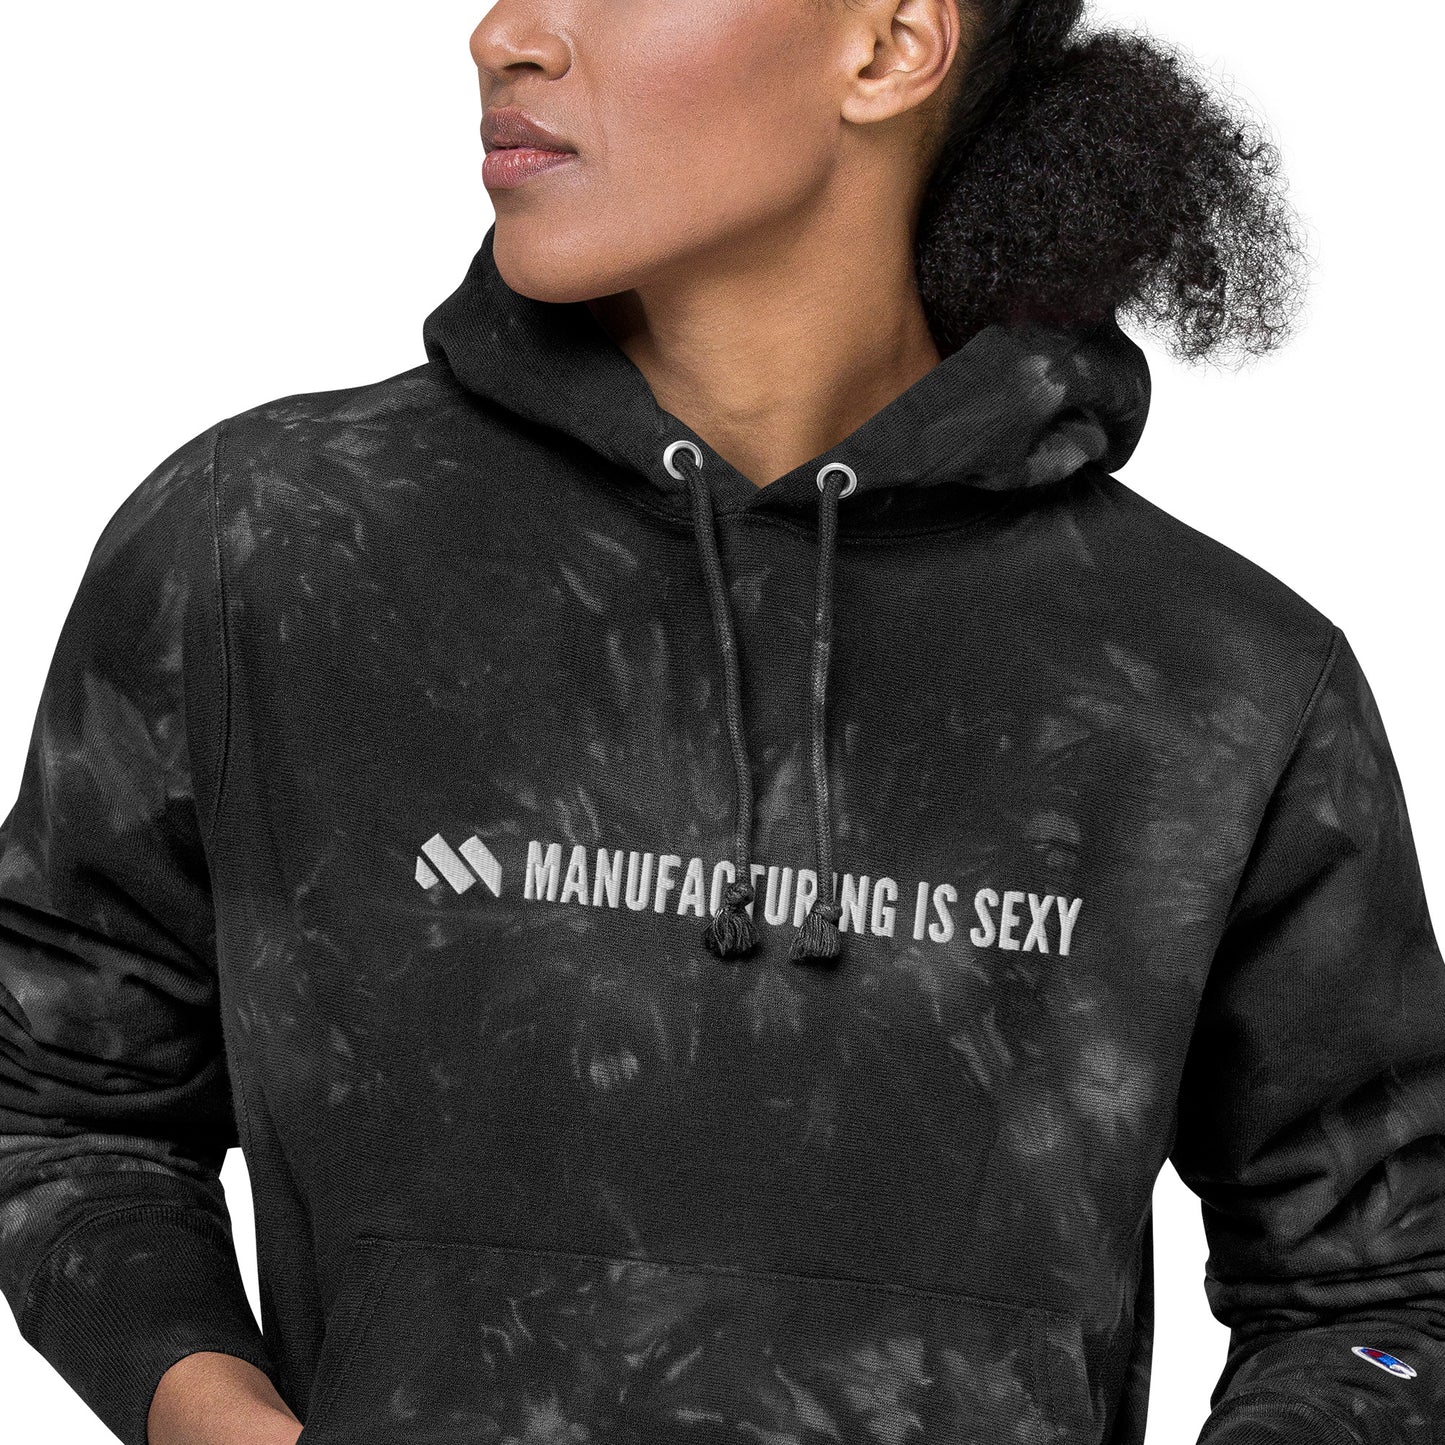 Manufacturing is sexy Champion tie-dye hoodie, embroidered